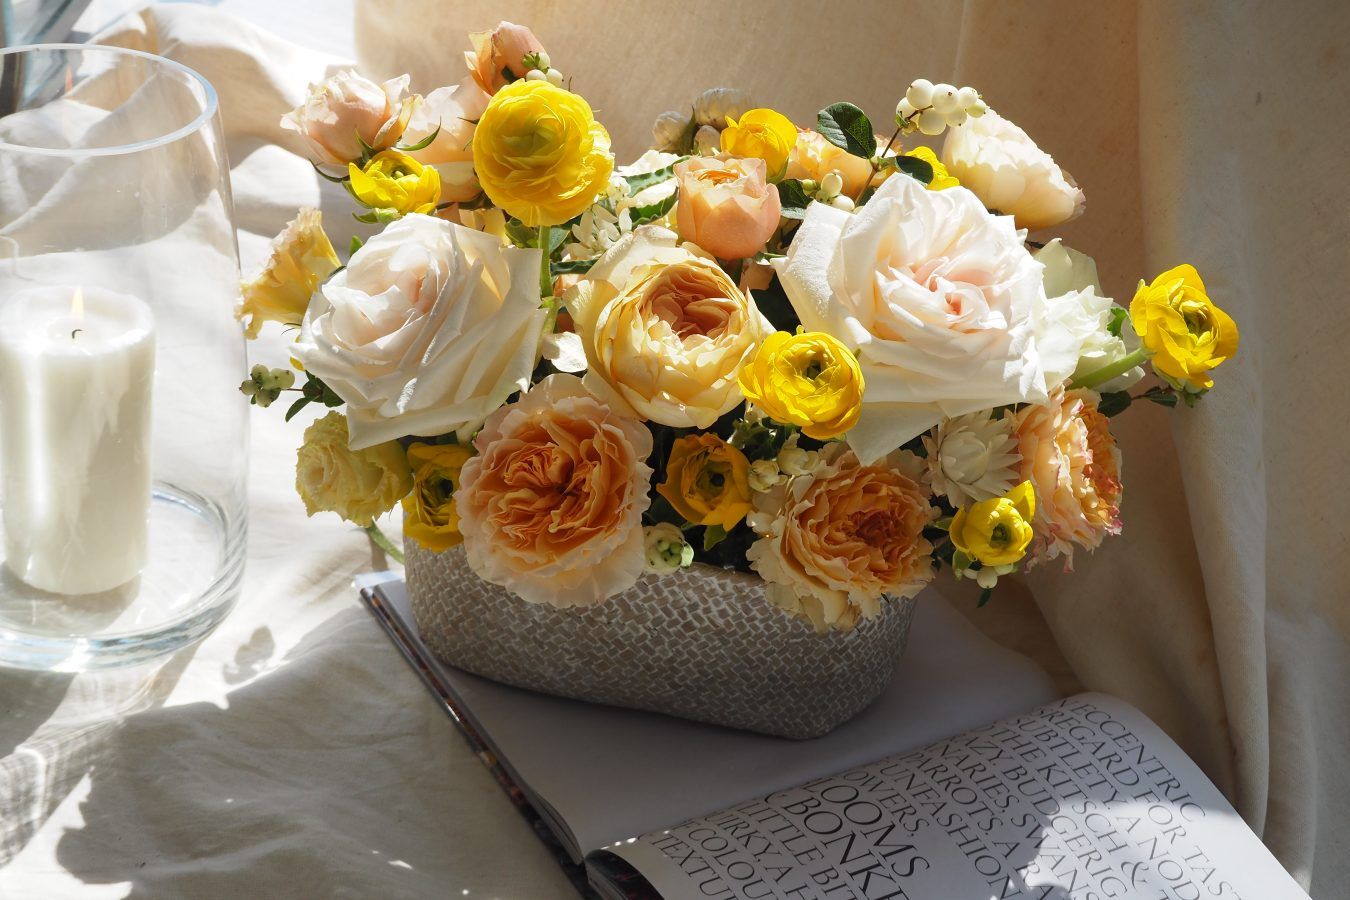 5 Premium Flower Delivery Services in Bangkok